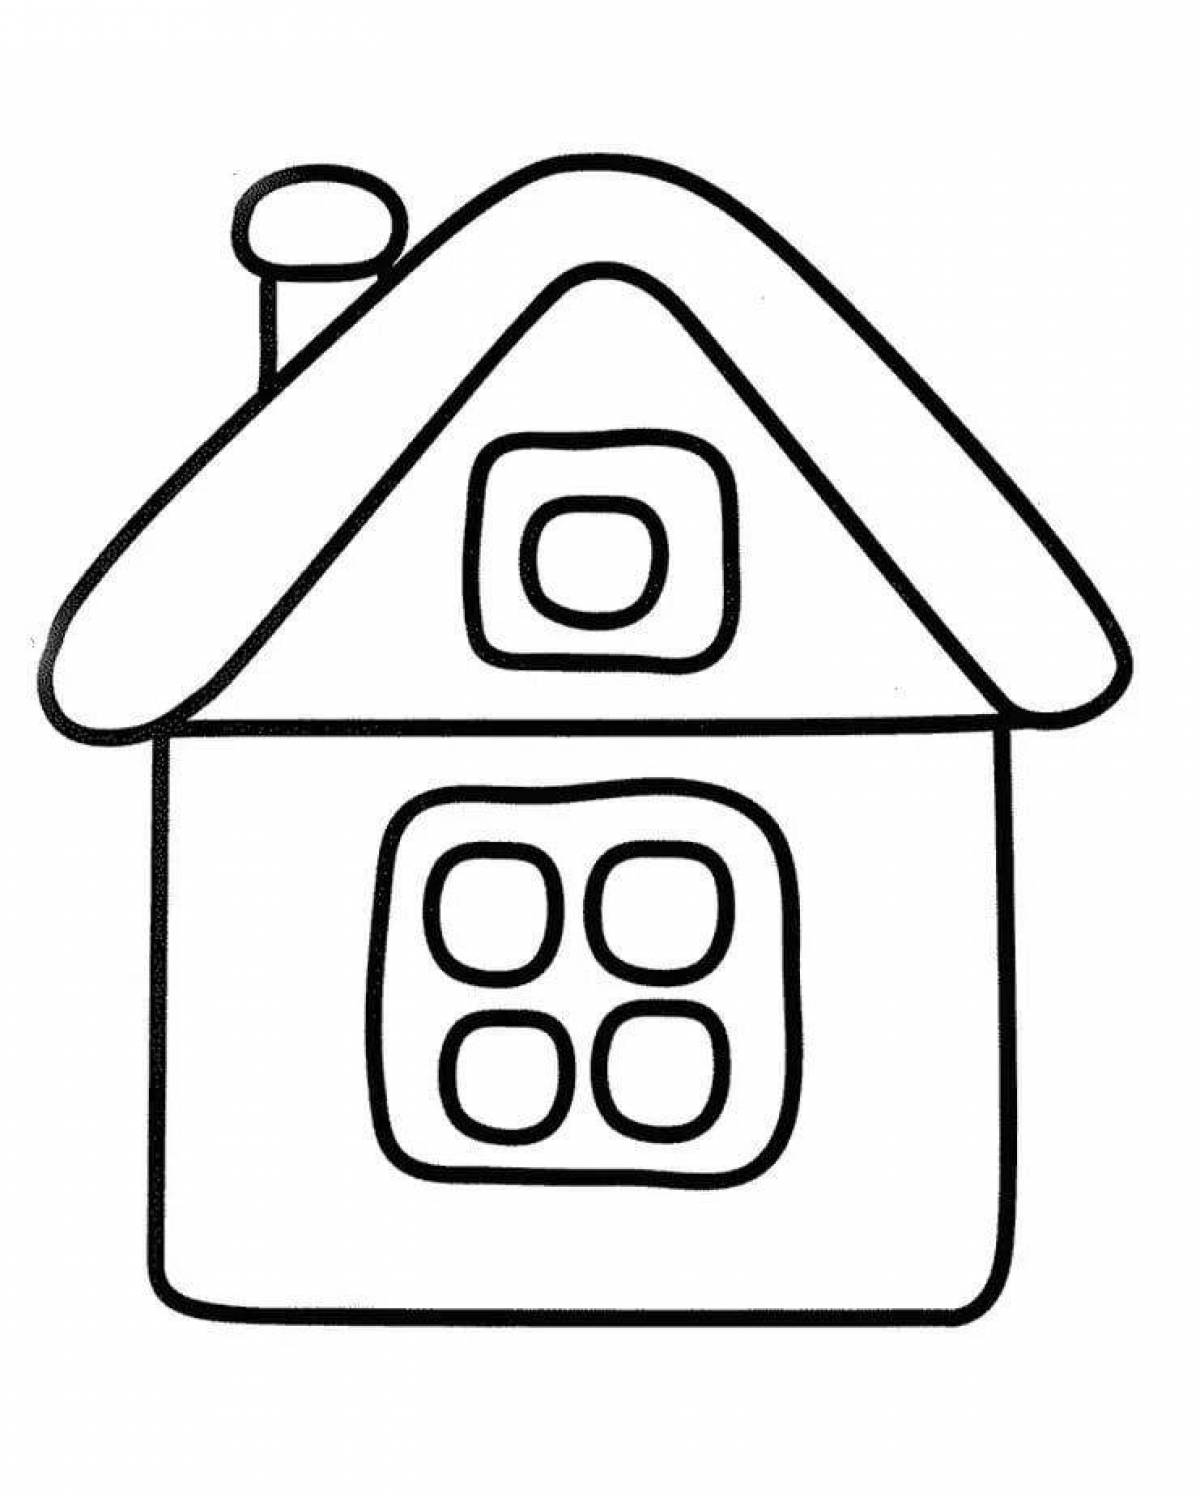 House picture for kids #9